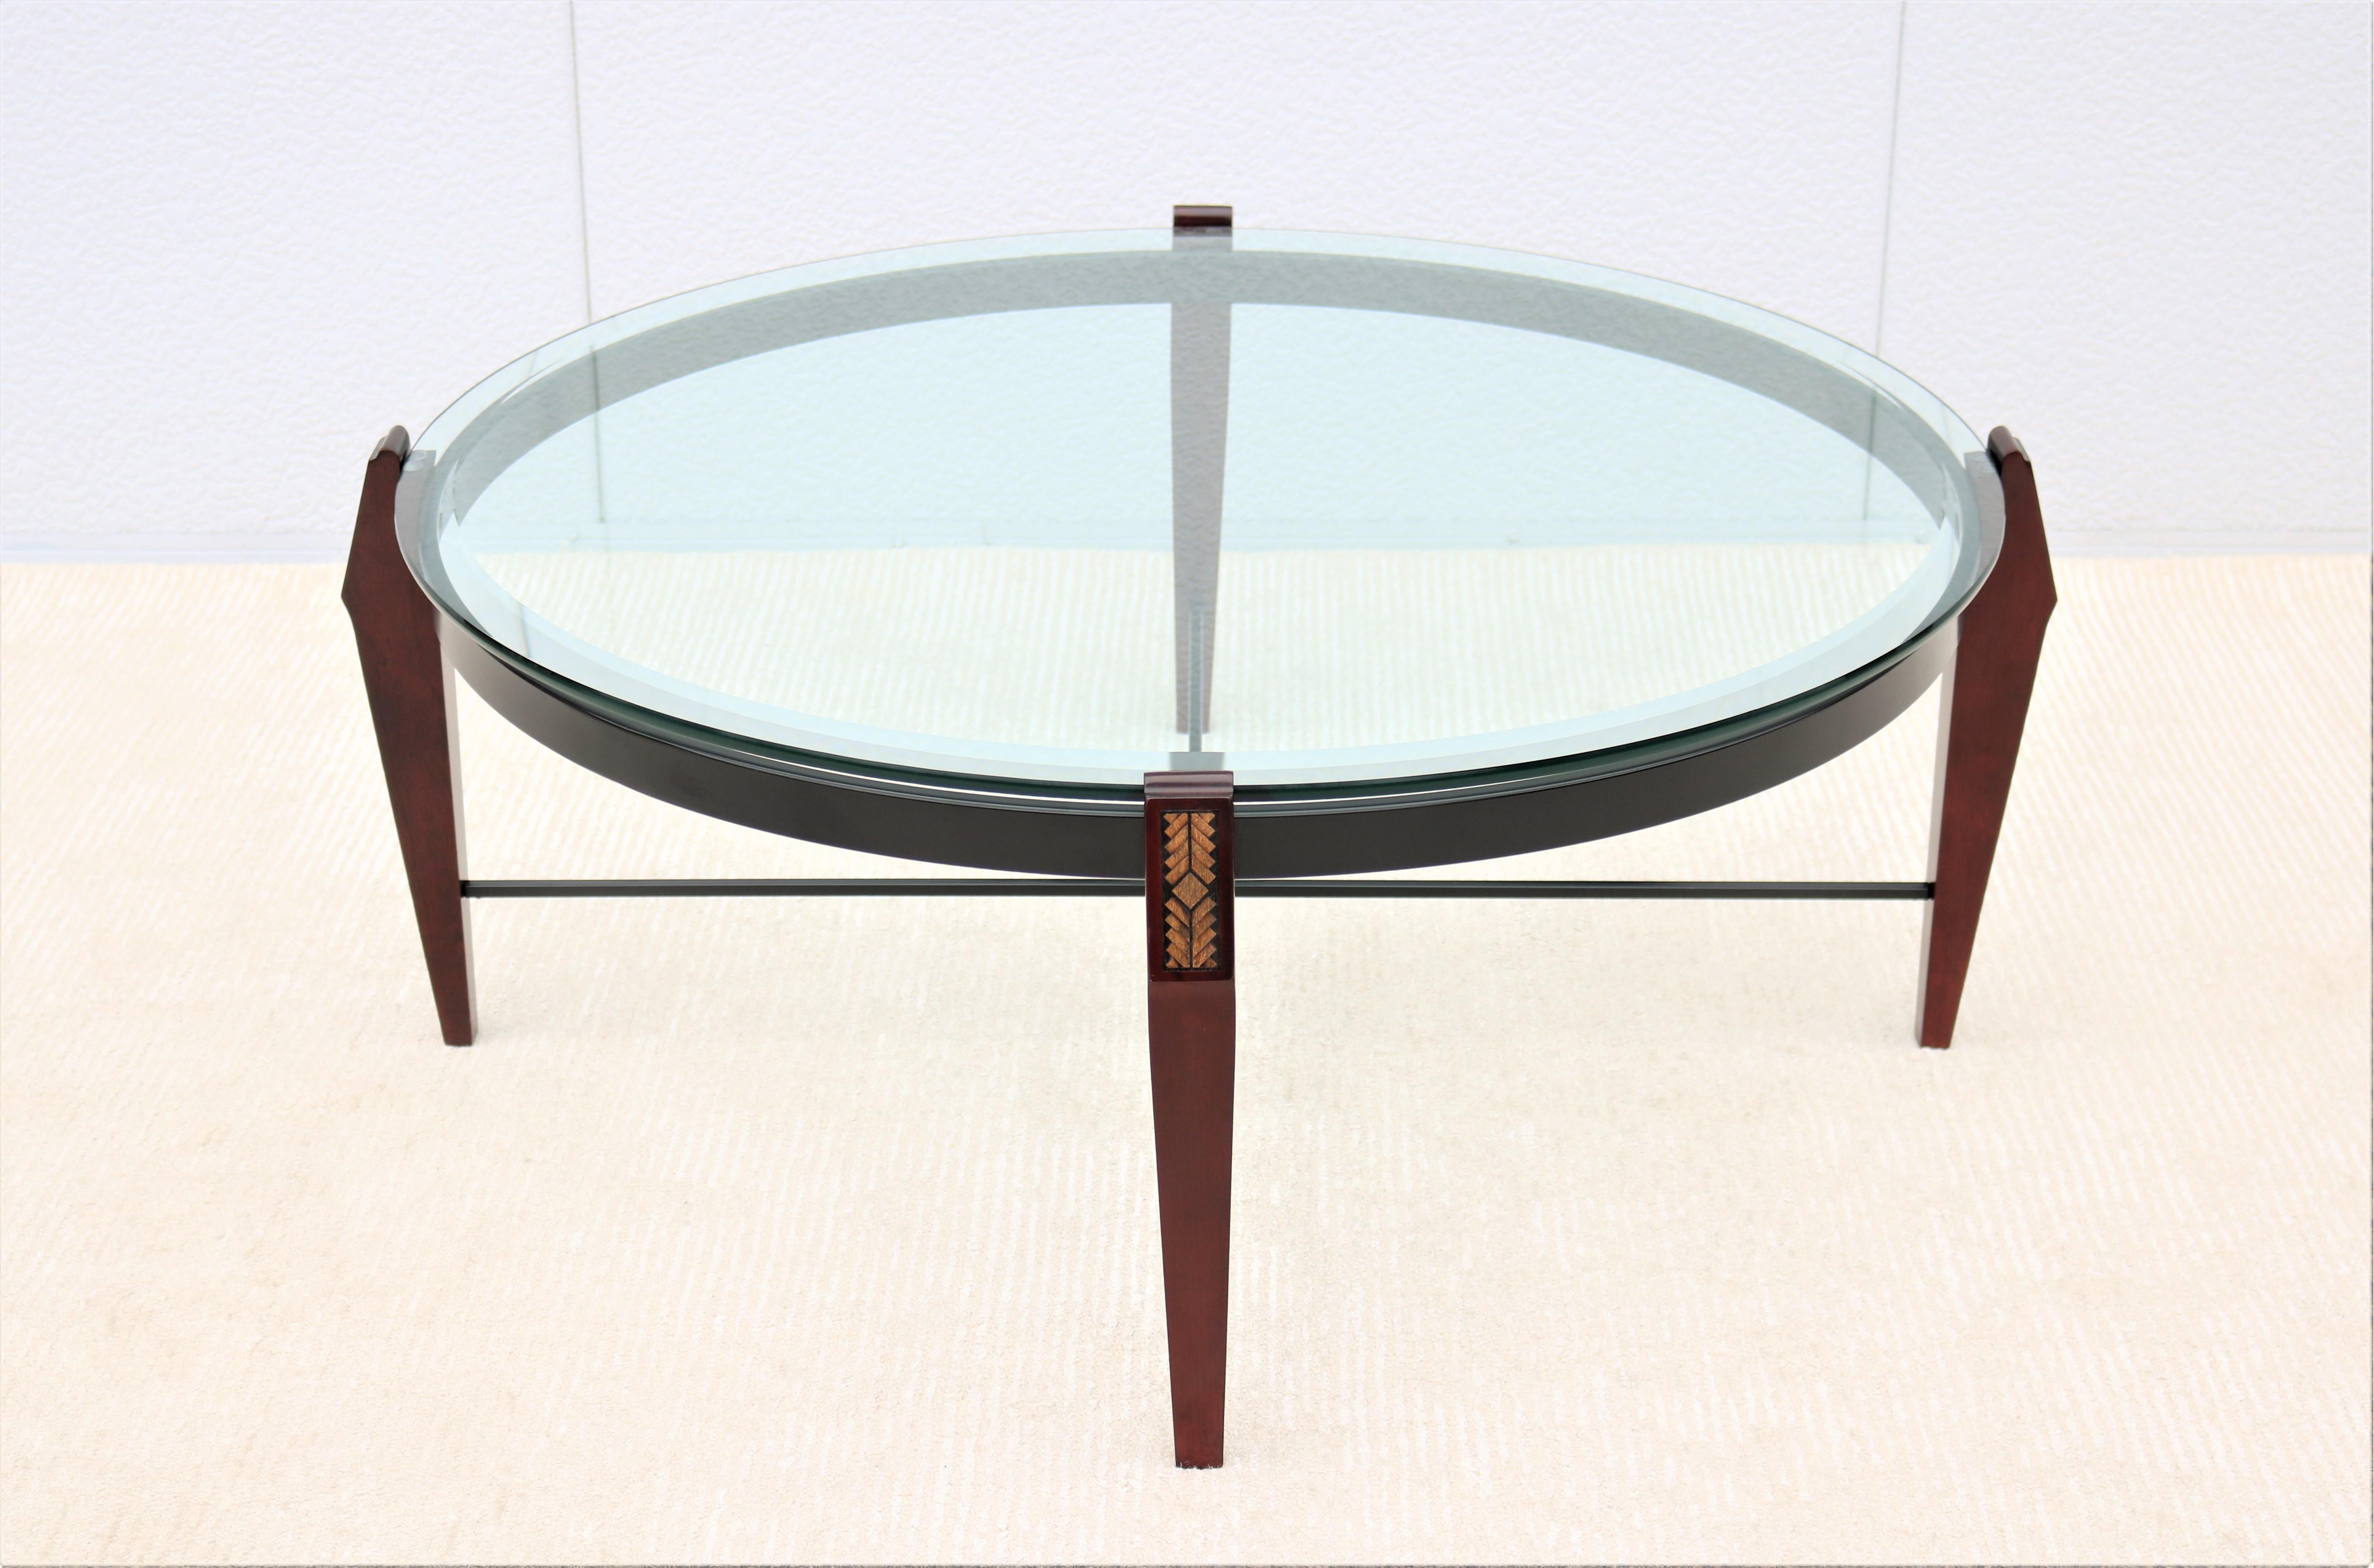 Fabulous vintage traditional round coffee table, inspired by the 18th and 19th century design.
This gorgeous table combines the luxury you desire with the functionality you need.
Features a wood and metal base that sets up the striking profile,